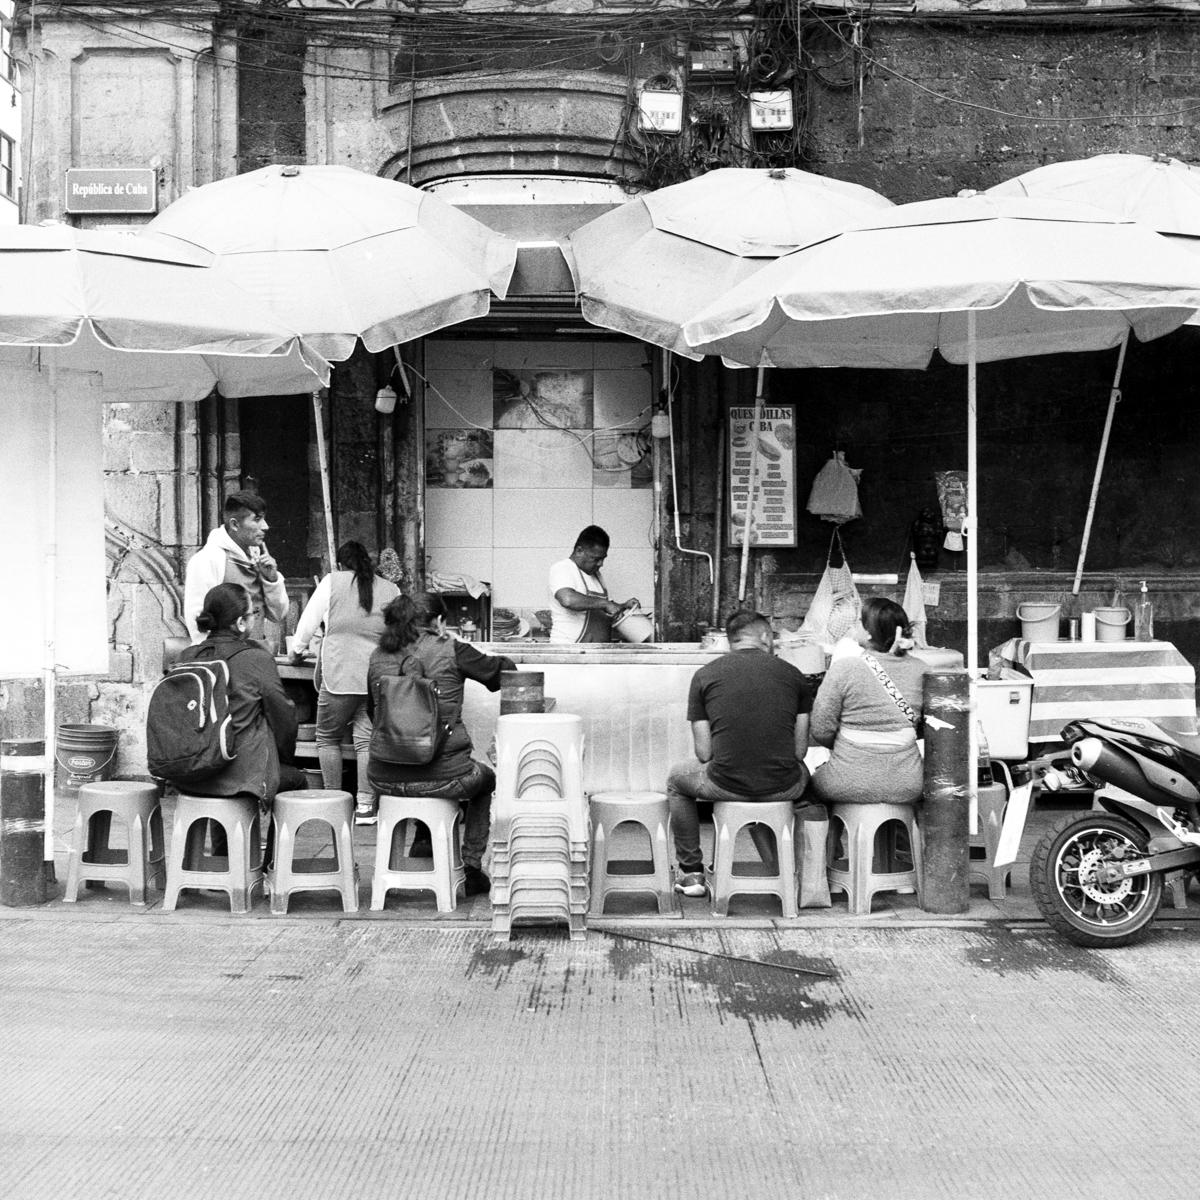 analog black-and-white street photograph of a street food stand in Mexico City's historic center